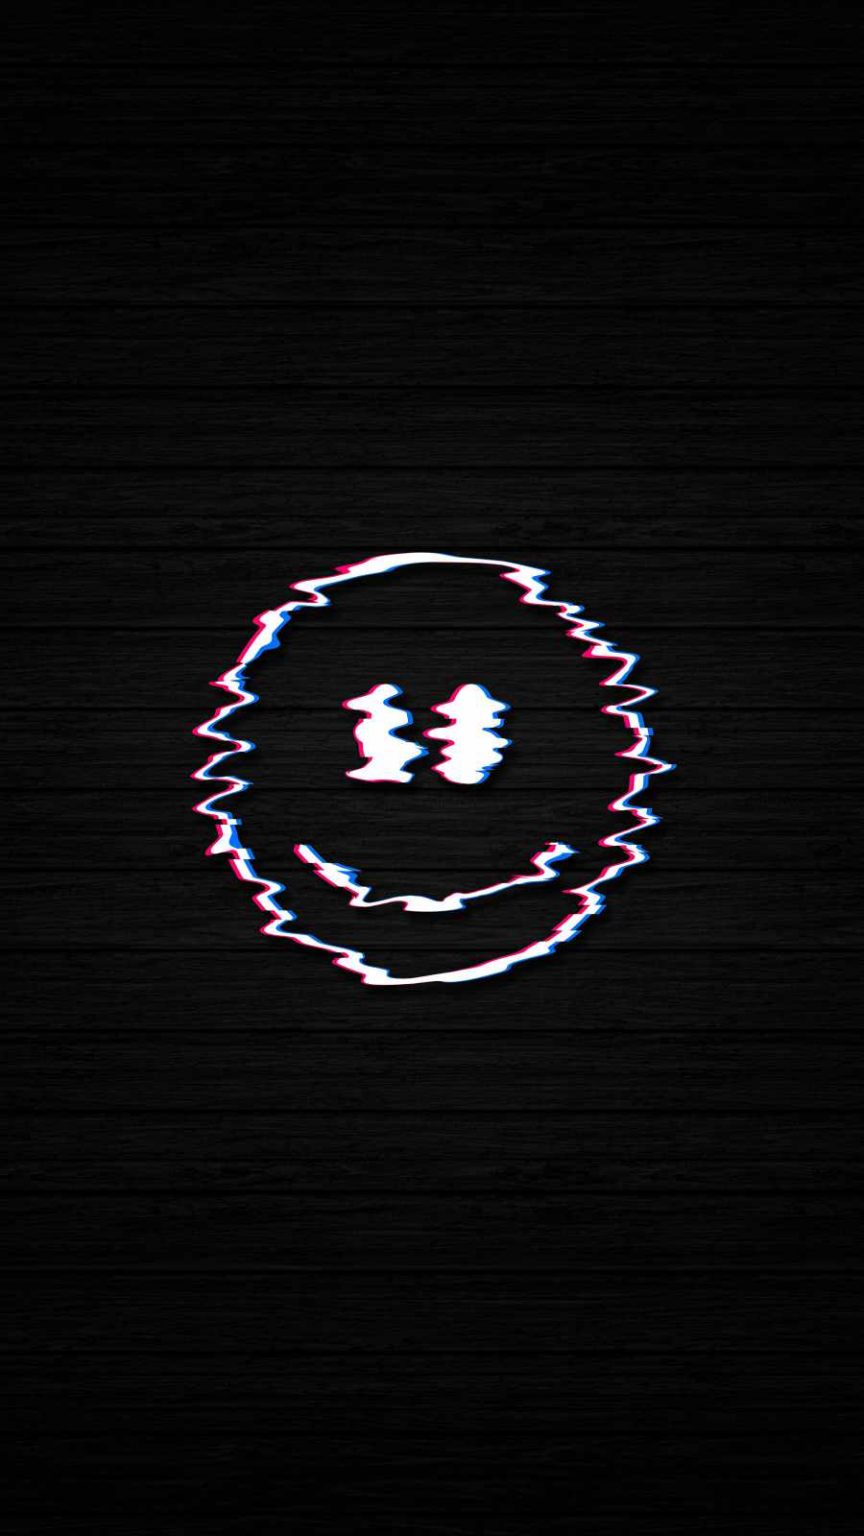 Wicked Smile IPhone Wallpaper - IPhone Wallpapers : iPhone Wallpapers